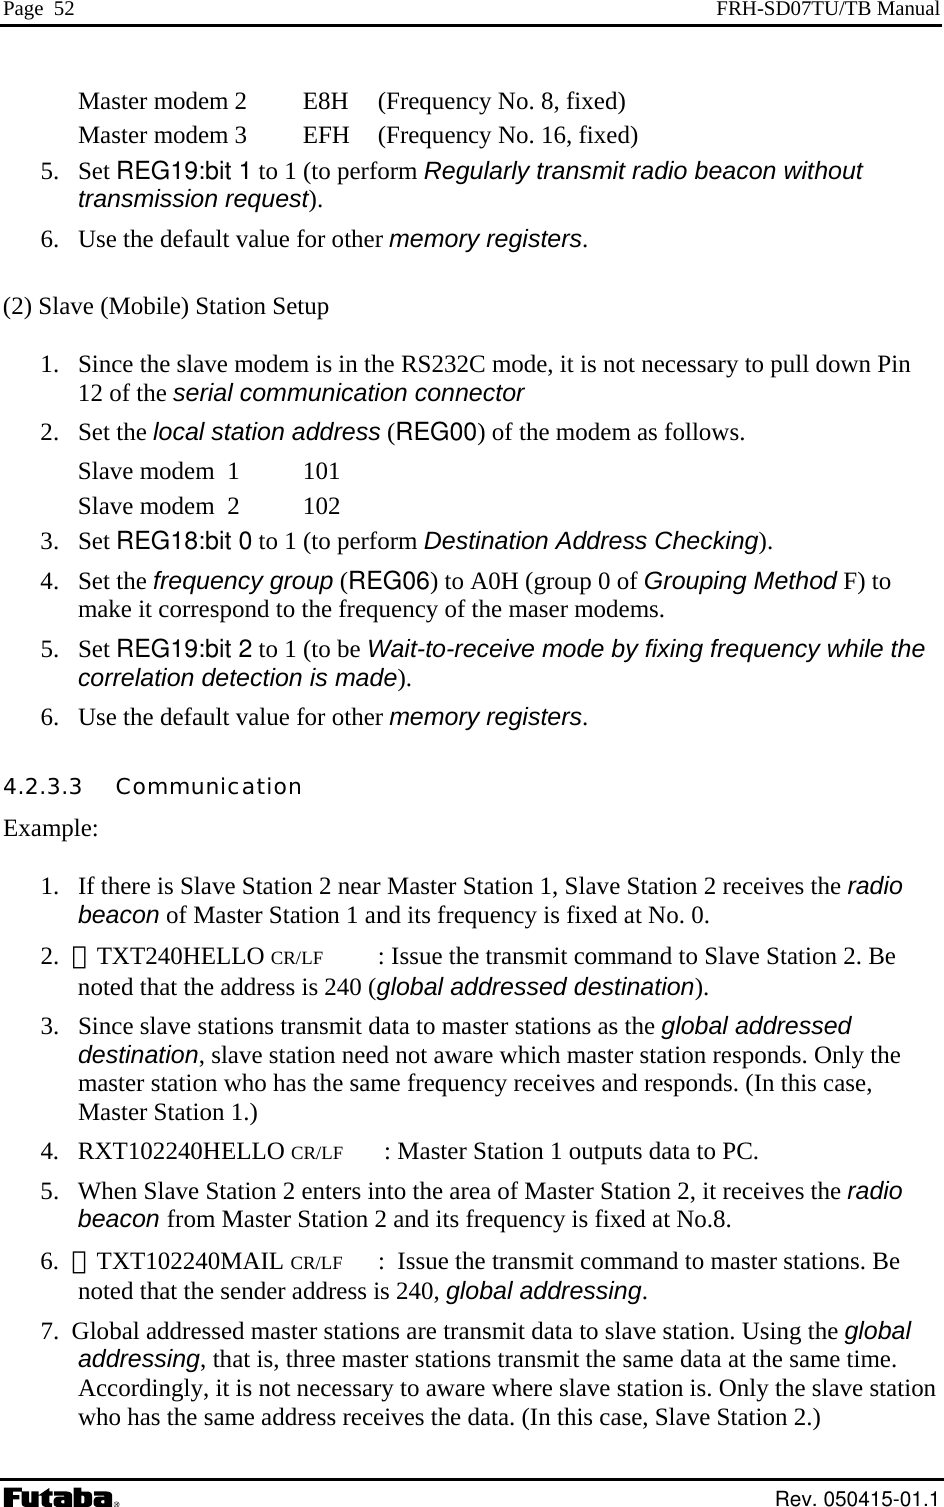 Page  52  FRH-SD07TU/TB Manual Master modem 2    E8H  (Frequency No. 8, fixed) Master modem 3    EFH  (Frequency No. 16, fixed) 5. Set REG19:bit 1 to 1 (to perform Regularly transmit radio beacon without transmission request). 6.  Use the default value for other memory registers.  (2) Slave (Mobile) Station Setup  1.  Since the slave modem is in the RS232C mode, it is not necessary to pull down Pin 12 of the serial communication connector 2. Set the local station address (REG00) of the modem as follows. Slave modem  1    101 Slave modem  2    102 3. Set REG18:bit 0 to 1 (to perform Destination Address Checking).   4. Set the frequency group (REG06) to A0H (group 0 of Grouping Method F) to make it correspond to the frequency of the maser modems.  5. Set REG19:bit 2 to 1 (to be Wait-to-receive mode by fixing frequency while the correlation detection is made).  6.  Use the default value for other memory registers. 4.2.3.3   Communication Example:  1.   If there is Slave Station 2 near Master Station 1, Slave Station 2 receives the radio beacon of Master Station 1 and its frequency is fixed at No. 0. 2.  ＠TXT240HELLO CR/LF  : Issue the transmit command to Slave Station 2. Be noted that the address is 240 (global addressed destination). 3.   Since slave stations transmit data to master stations as the global addressed destination, slave station need not aware which master station responds. Only the master station who has the same frequency receives and responds. (In this case, Master Station 1.)  4.   RXT102240HELLO CR/LF    : Master Station 1 outputs data to PC. 5.   When Slave Station 2 enters into the area of Master Station 2, it receives the radio beacon from Master Station 2 and its frequency is fixed at No.8.  6.  ＠TXT102240MAIL CR/LF :  Issue the transmit command to master stations. Be noted that the sender address is 240, global addressing. 7.  Global addressed master stations are transmit data to slave station. Using the global addressing, that is, three master stations transmit the same data at the same time. Accordingly, it is not necessary to aware where slave station is. Only the slave station who has the same address receives the data. (In this case, Slave Station 2.)  Rev. 050415-01.1 